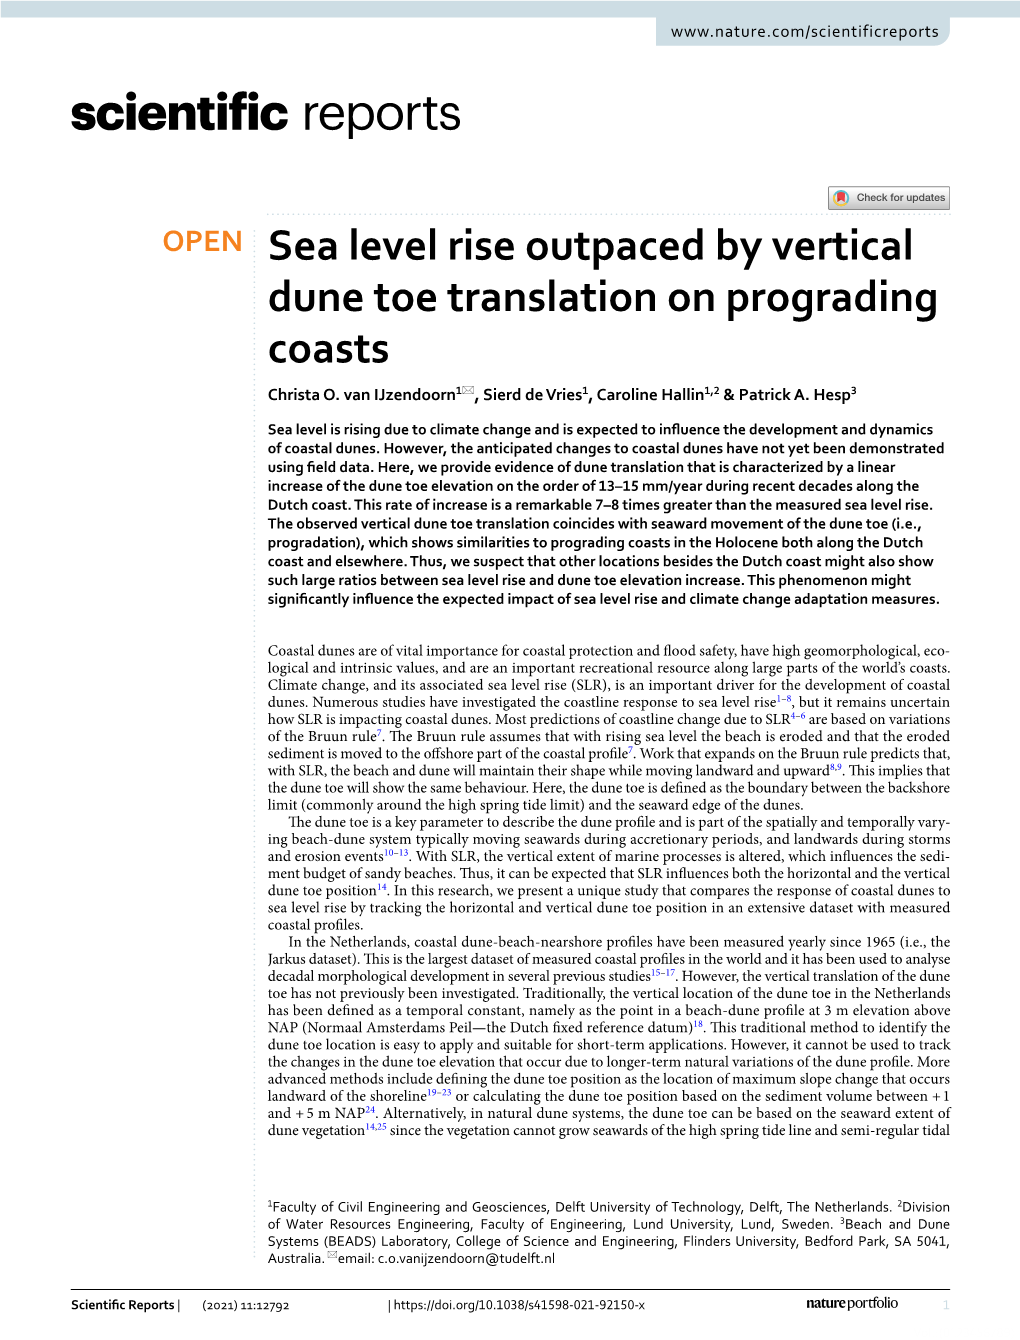 Sea Level Rise Outpaced by Vertical Dune Toe Translation on Prograding Coasts Christa O